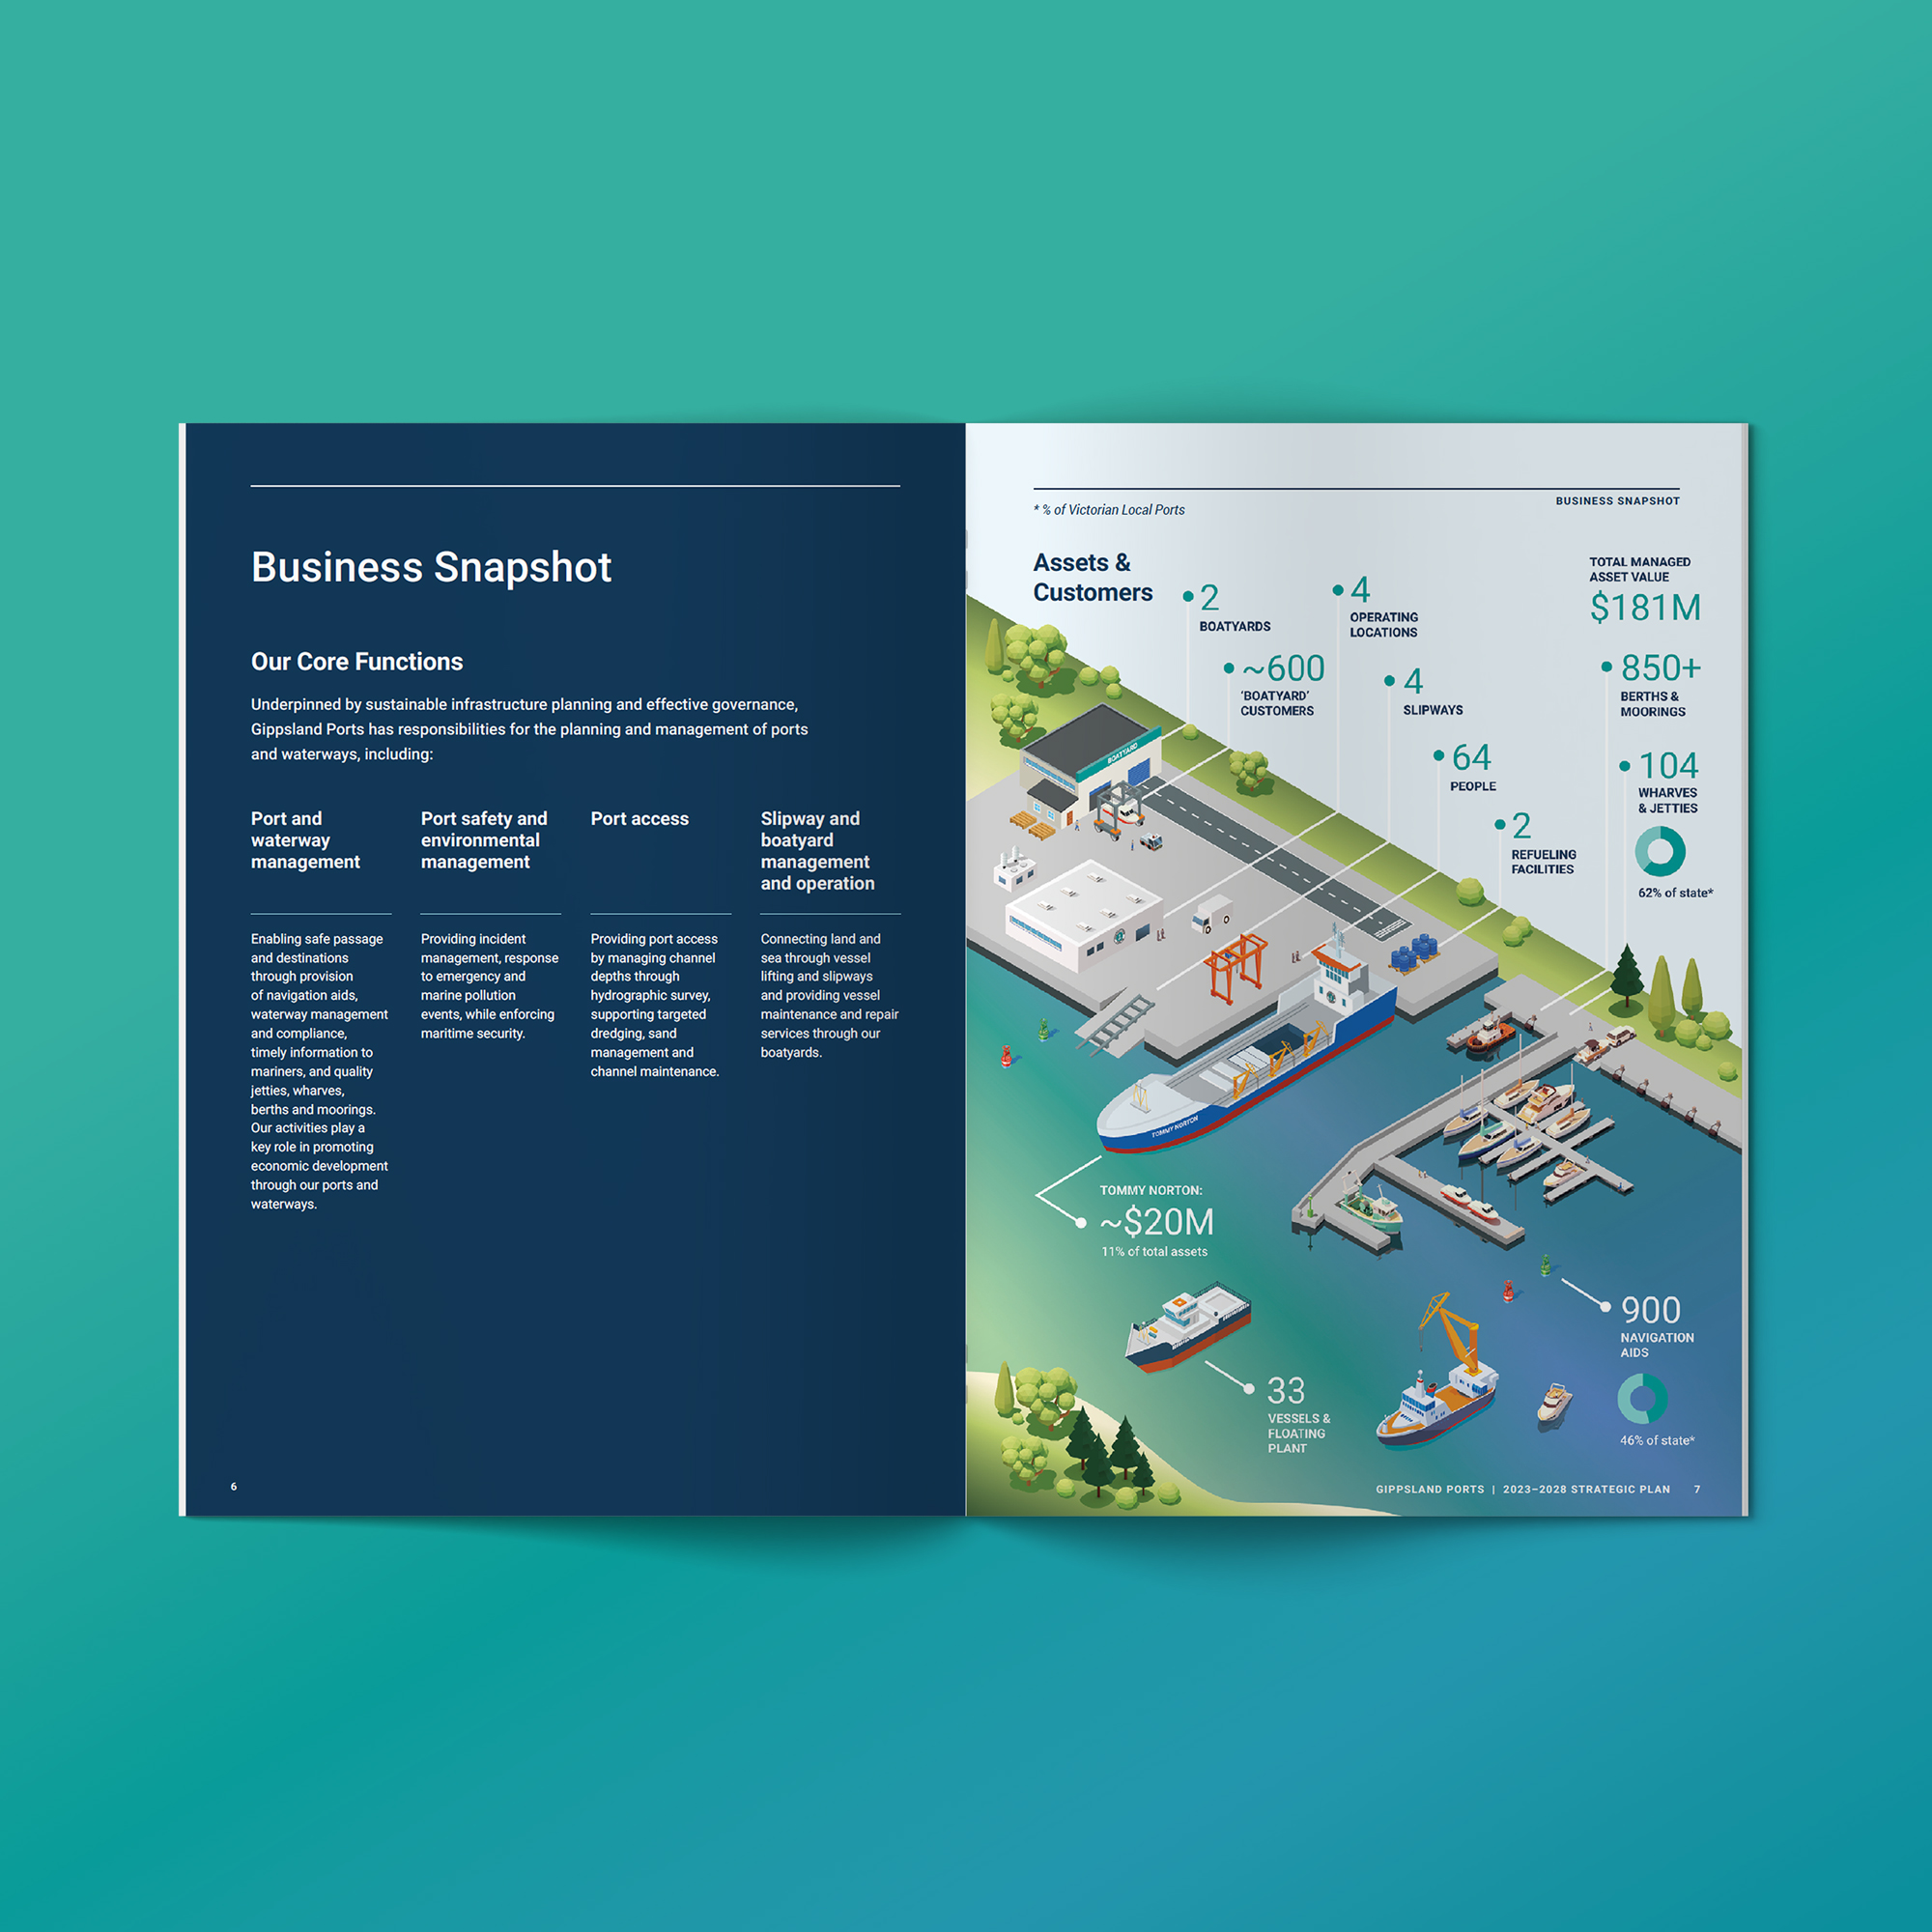 Image features the 'Business Snapshot' spread taken from the Gippsland Ports Strategic Plan 2023-28, which includes a full-page full-colour custom vector-based infographic designed to resemble the actual boatyard and Lakes Entrance office of Gippsland Ports.